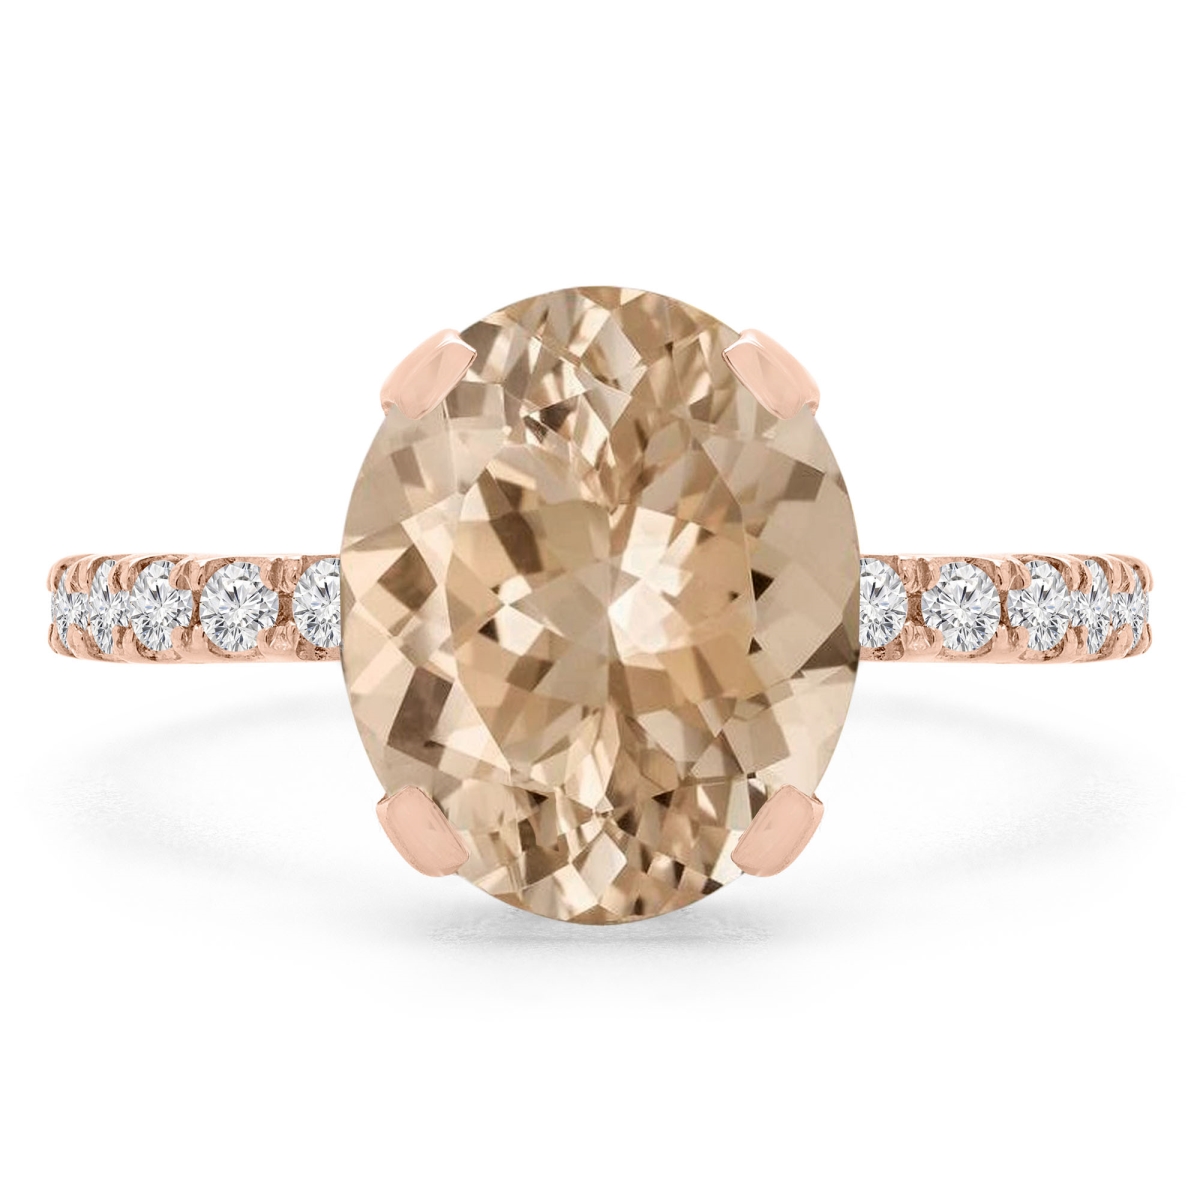 Picture of Majesty Diamonds MD190407-P 3.4 CTW Oval Pink Morganite Under Halo Engagement Ring in 14K Rose Gold